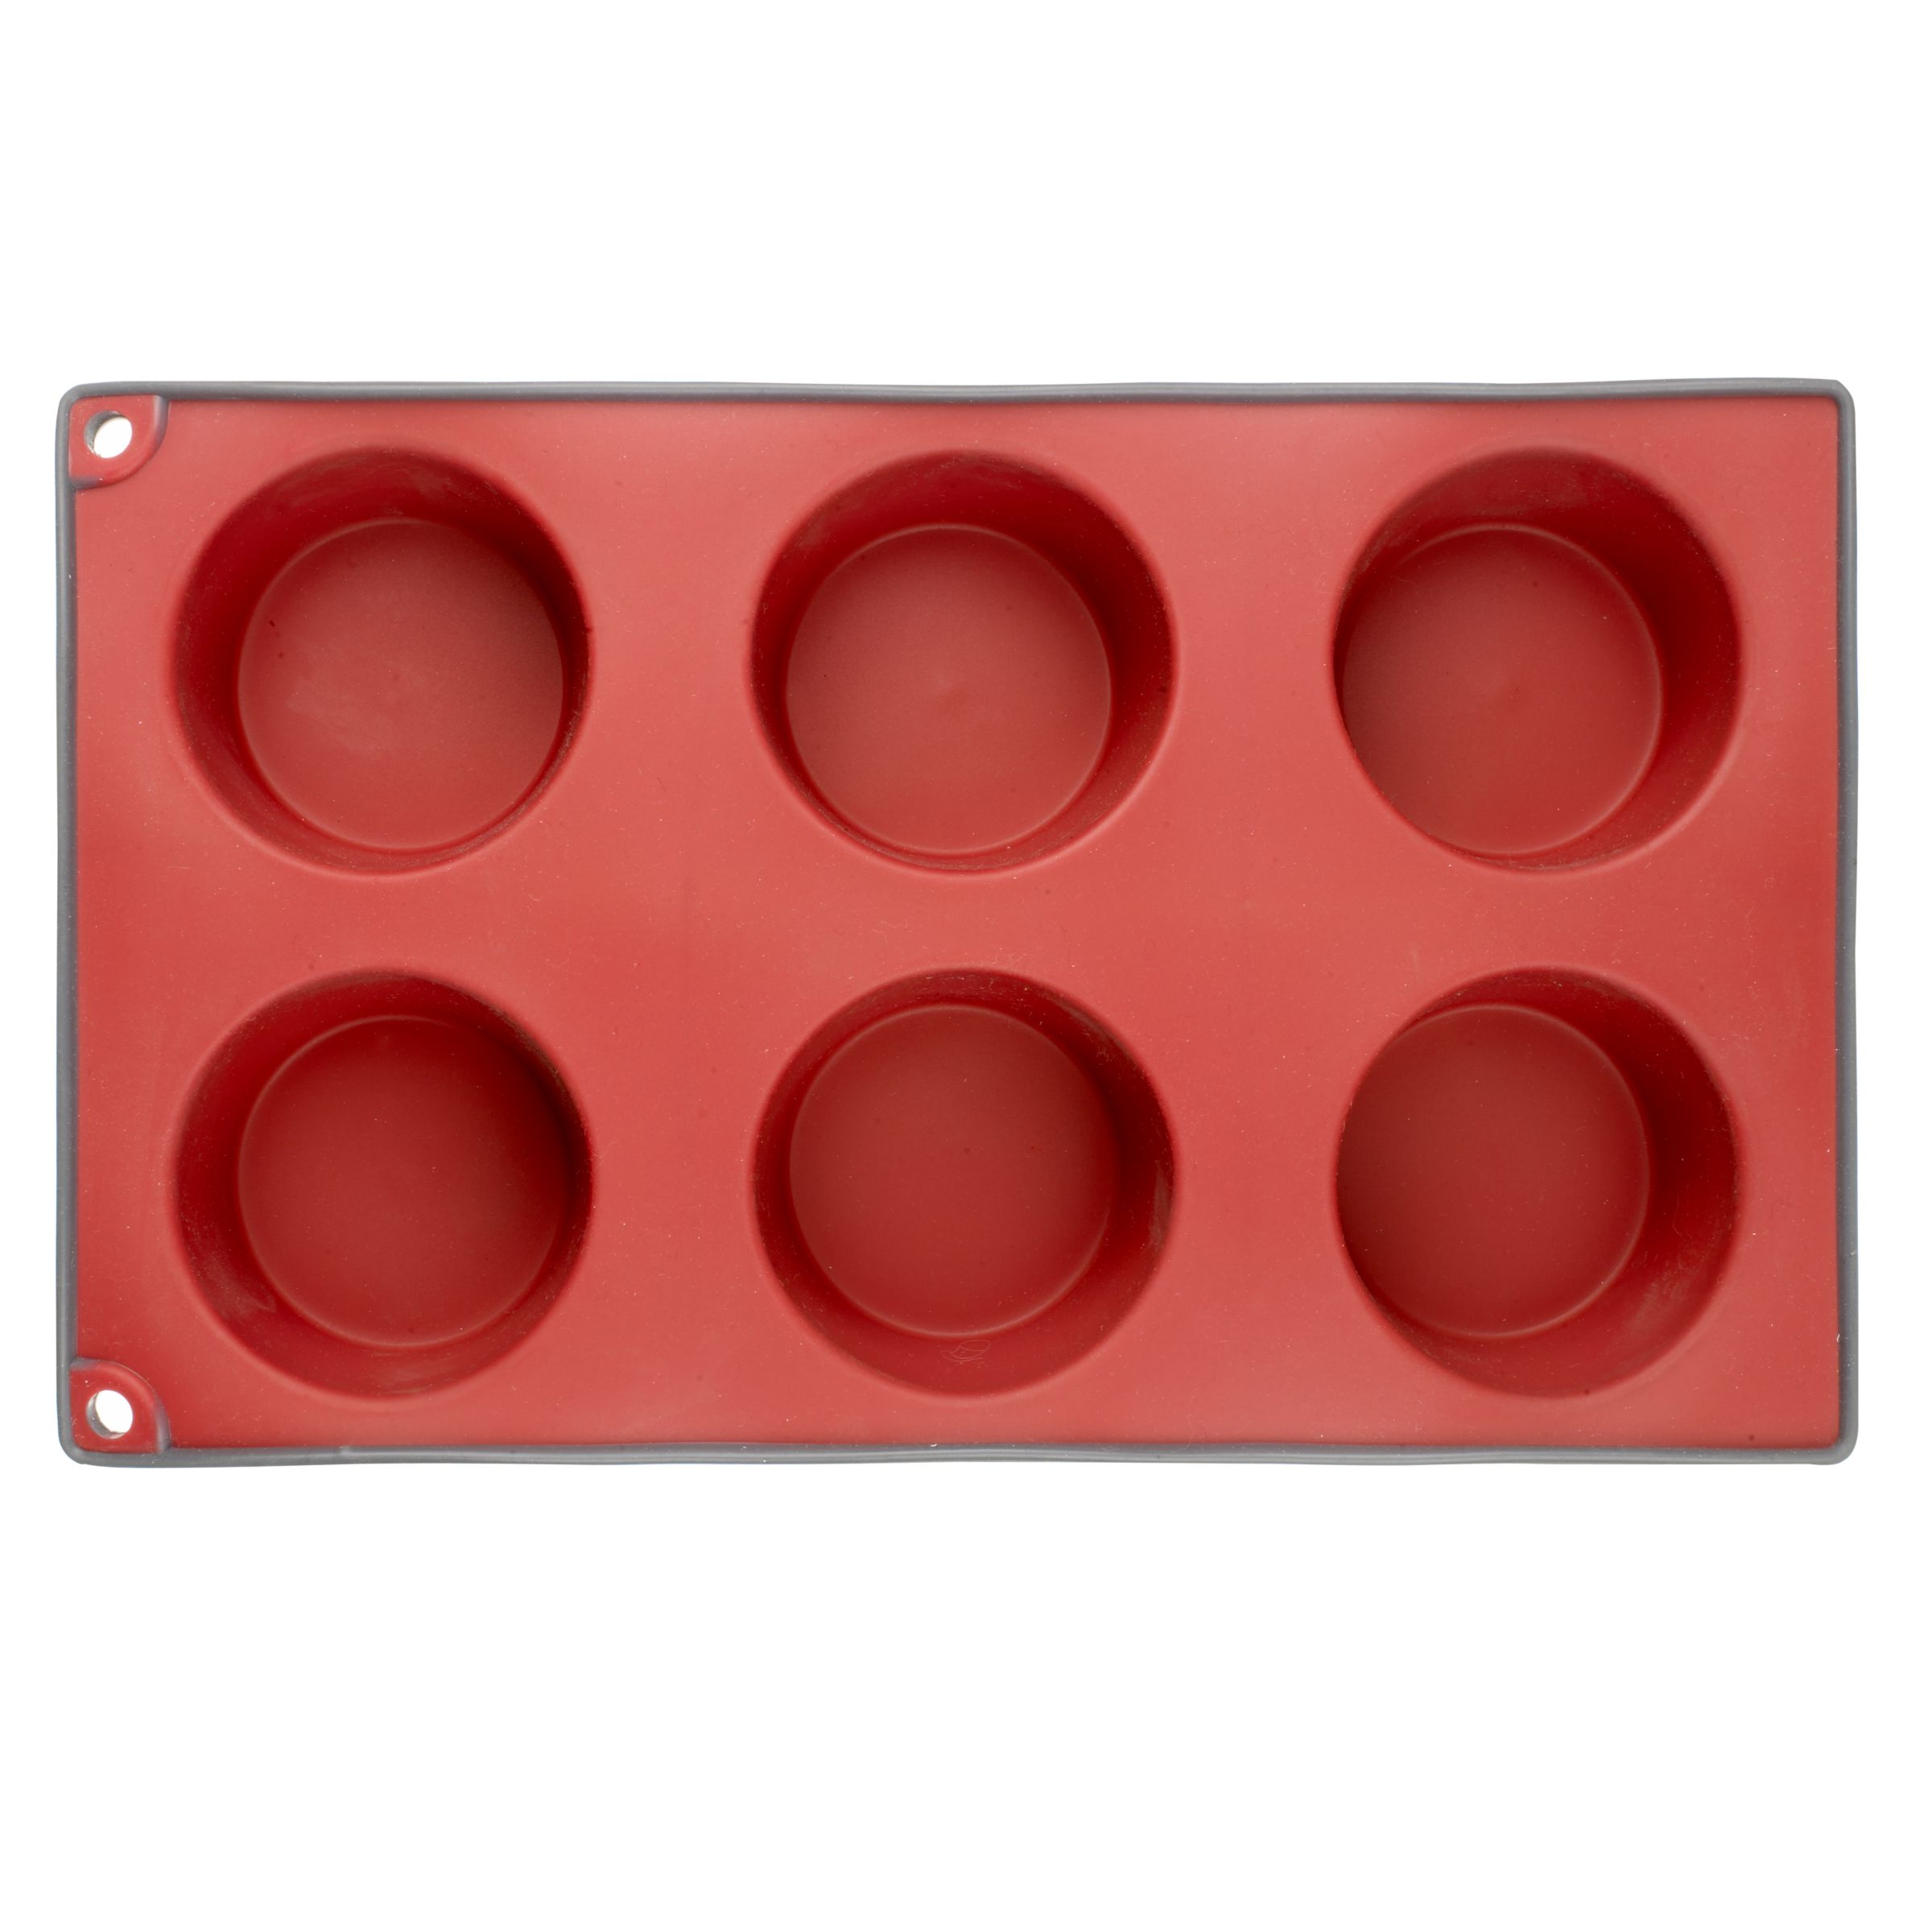 6 Cup Muffin Mould, Red